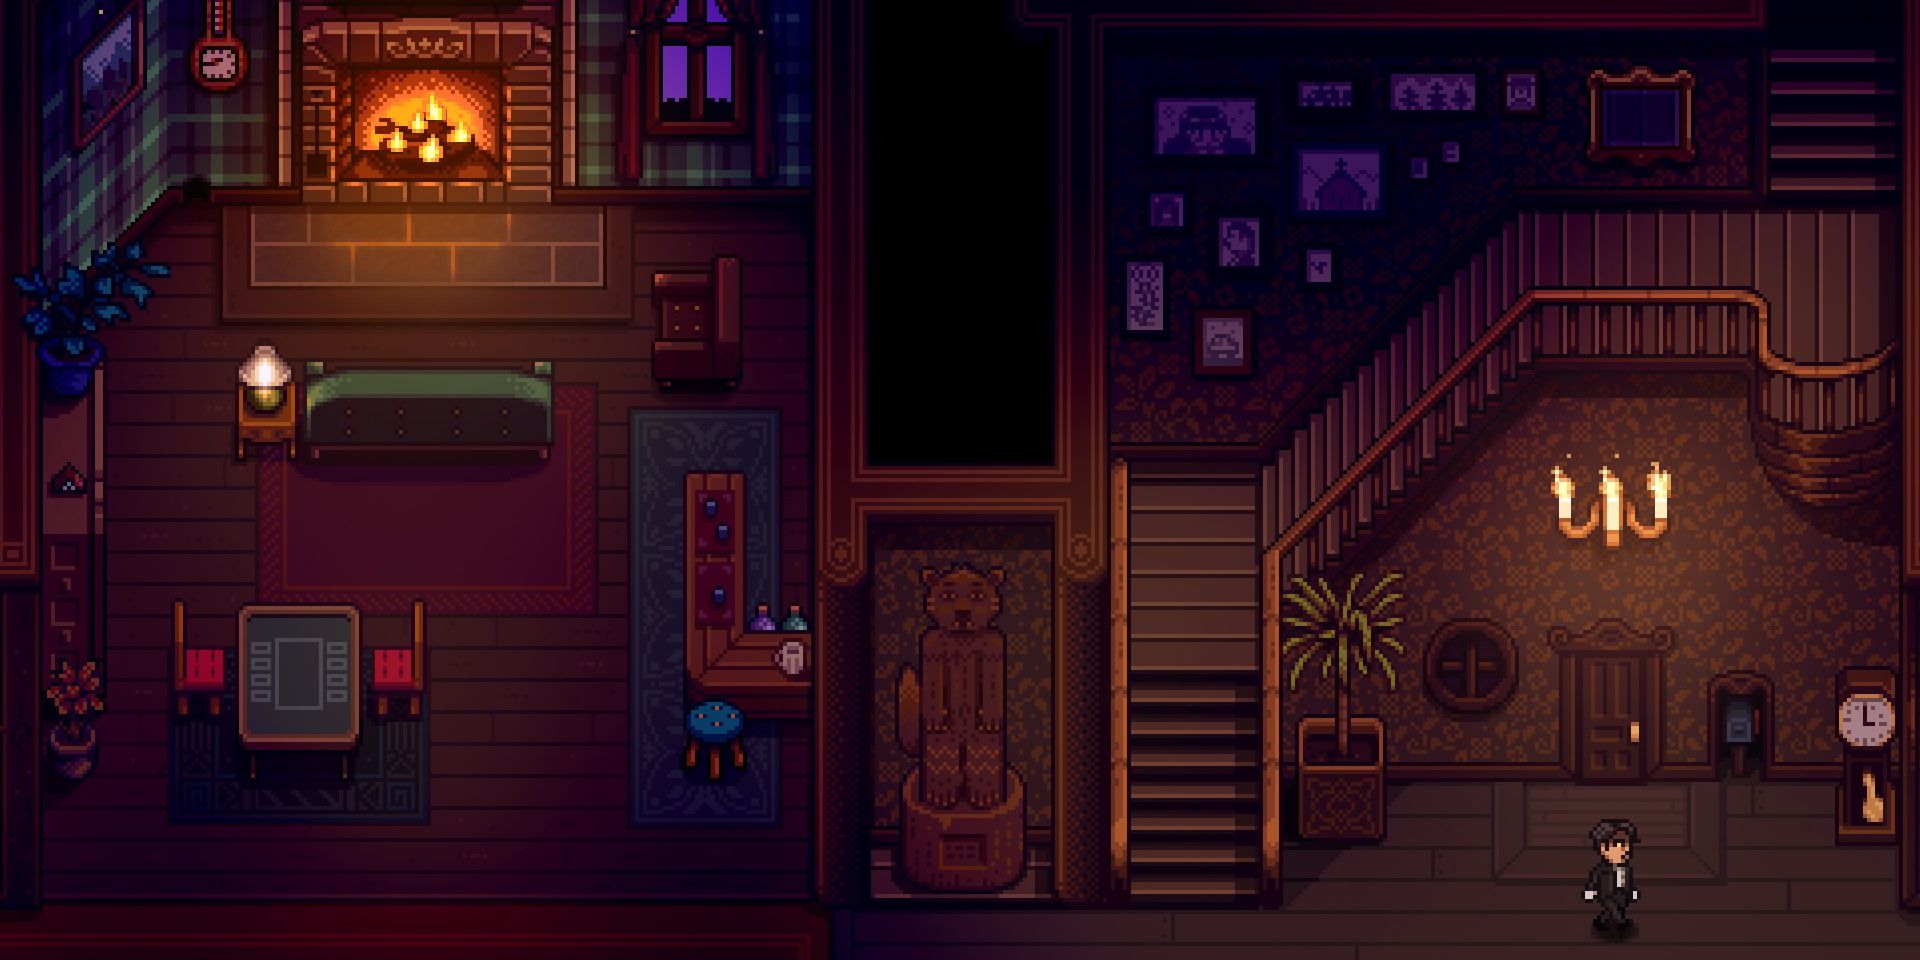 A living space in the haunted castle in Haunted Chocolatier